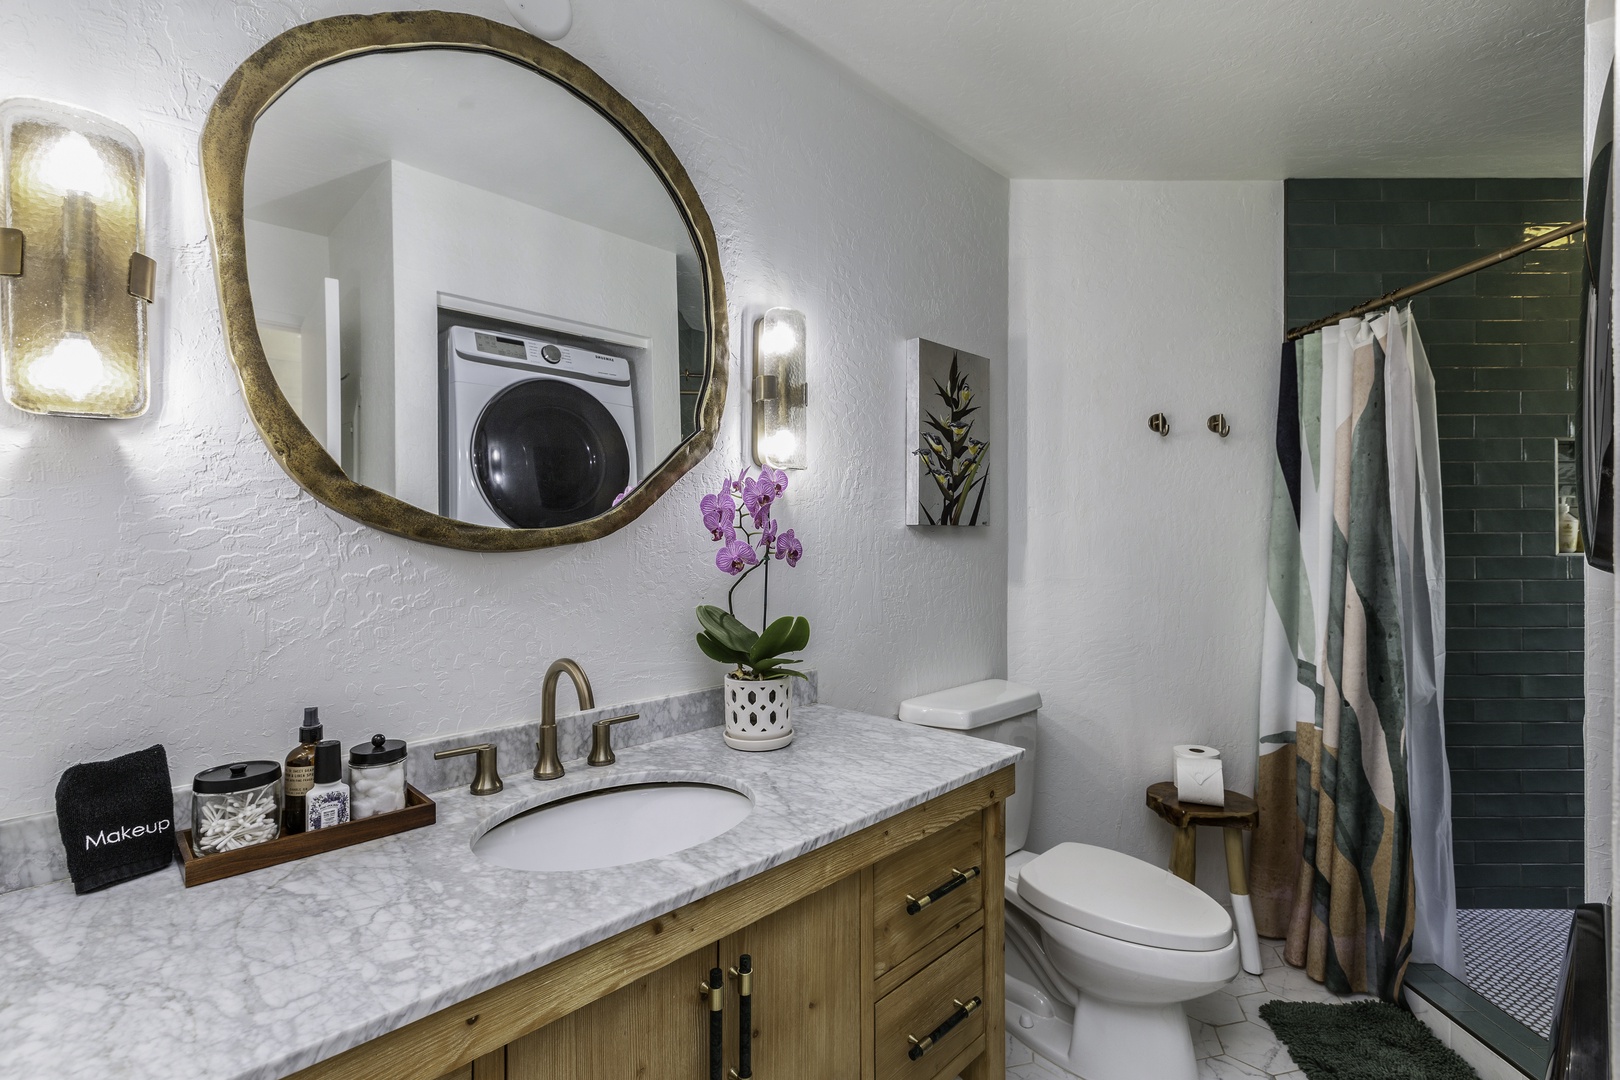 Princeville Vacation Rentals, Pali Ke Kua 207 - The ensuite is fully remodeled and well-appointed with a large walk-in shower, which possesses its own window framing lovely garden views